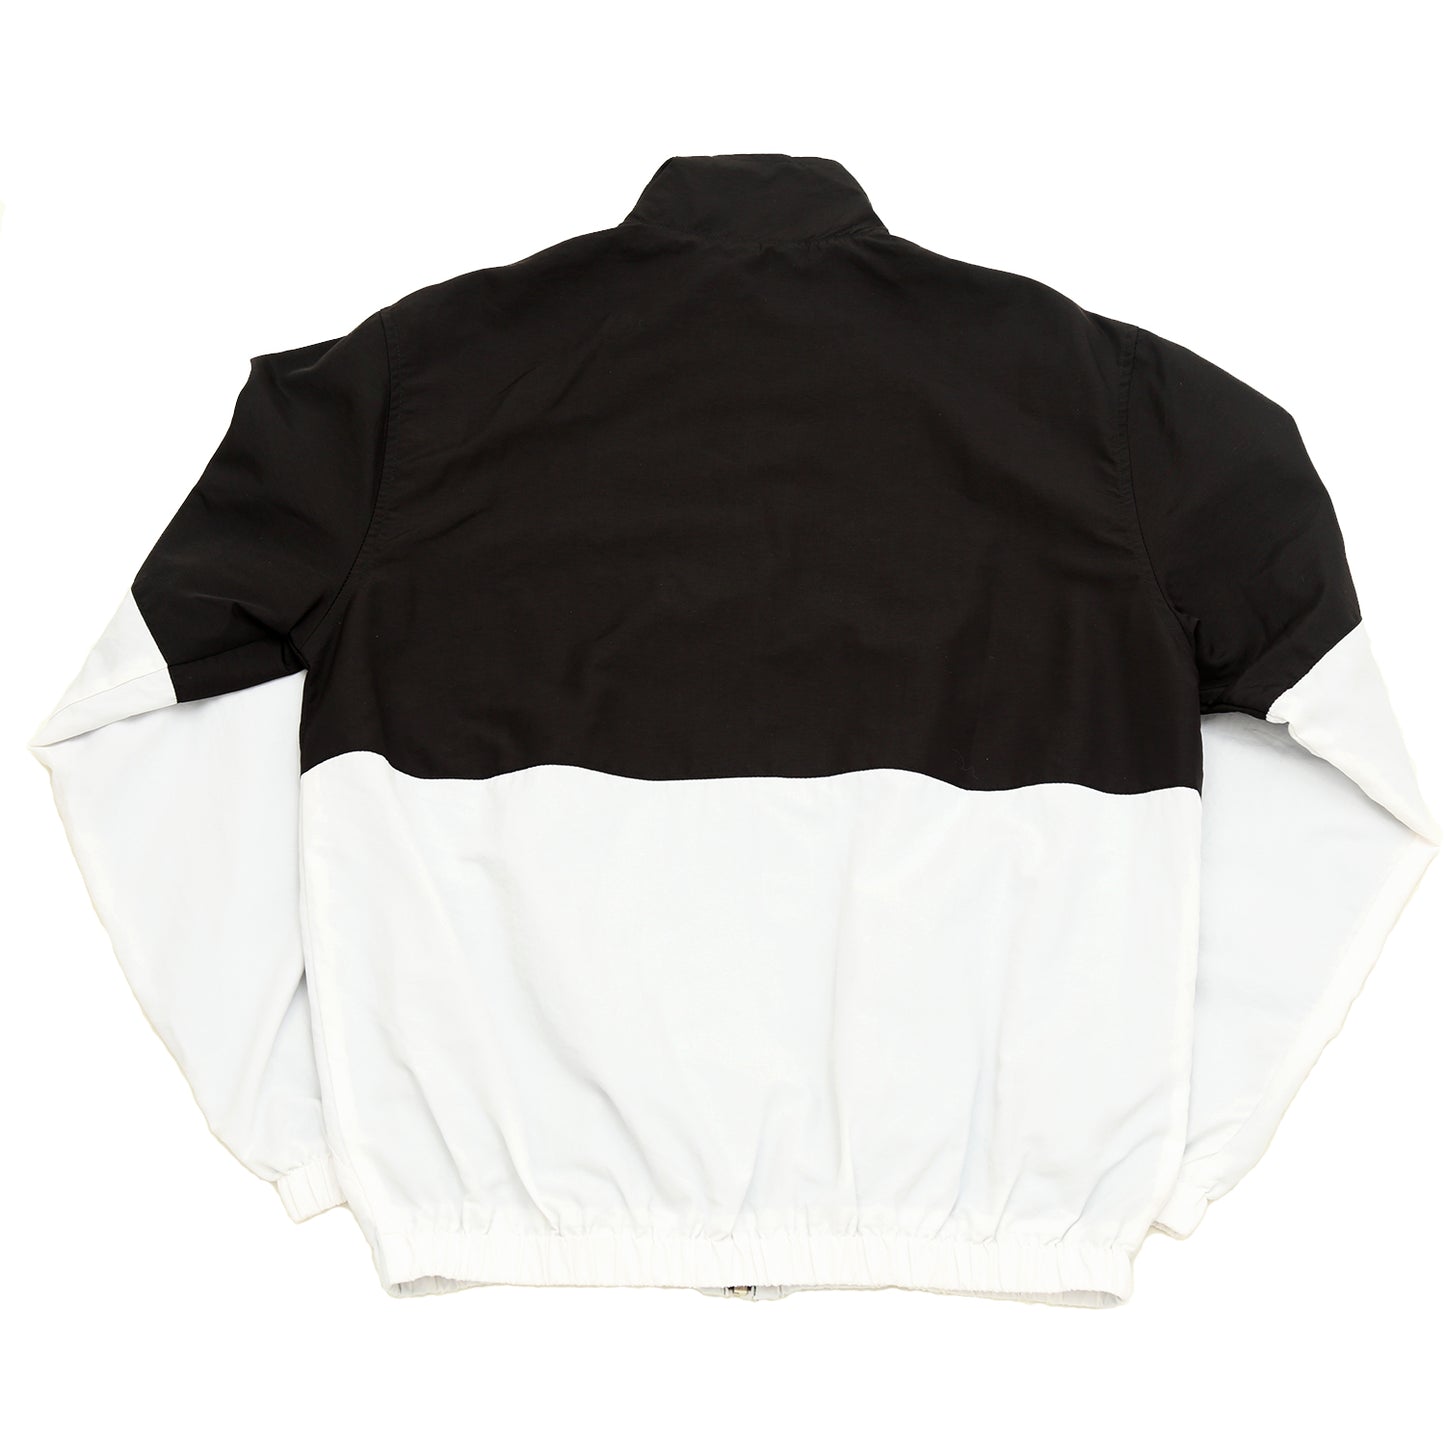 BASECAMP WOVEN TRACK TOP IN BLACK AND WHITE